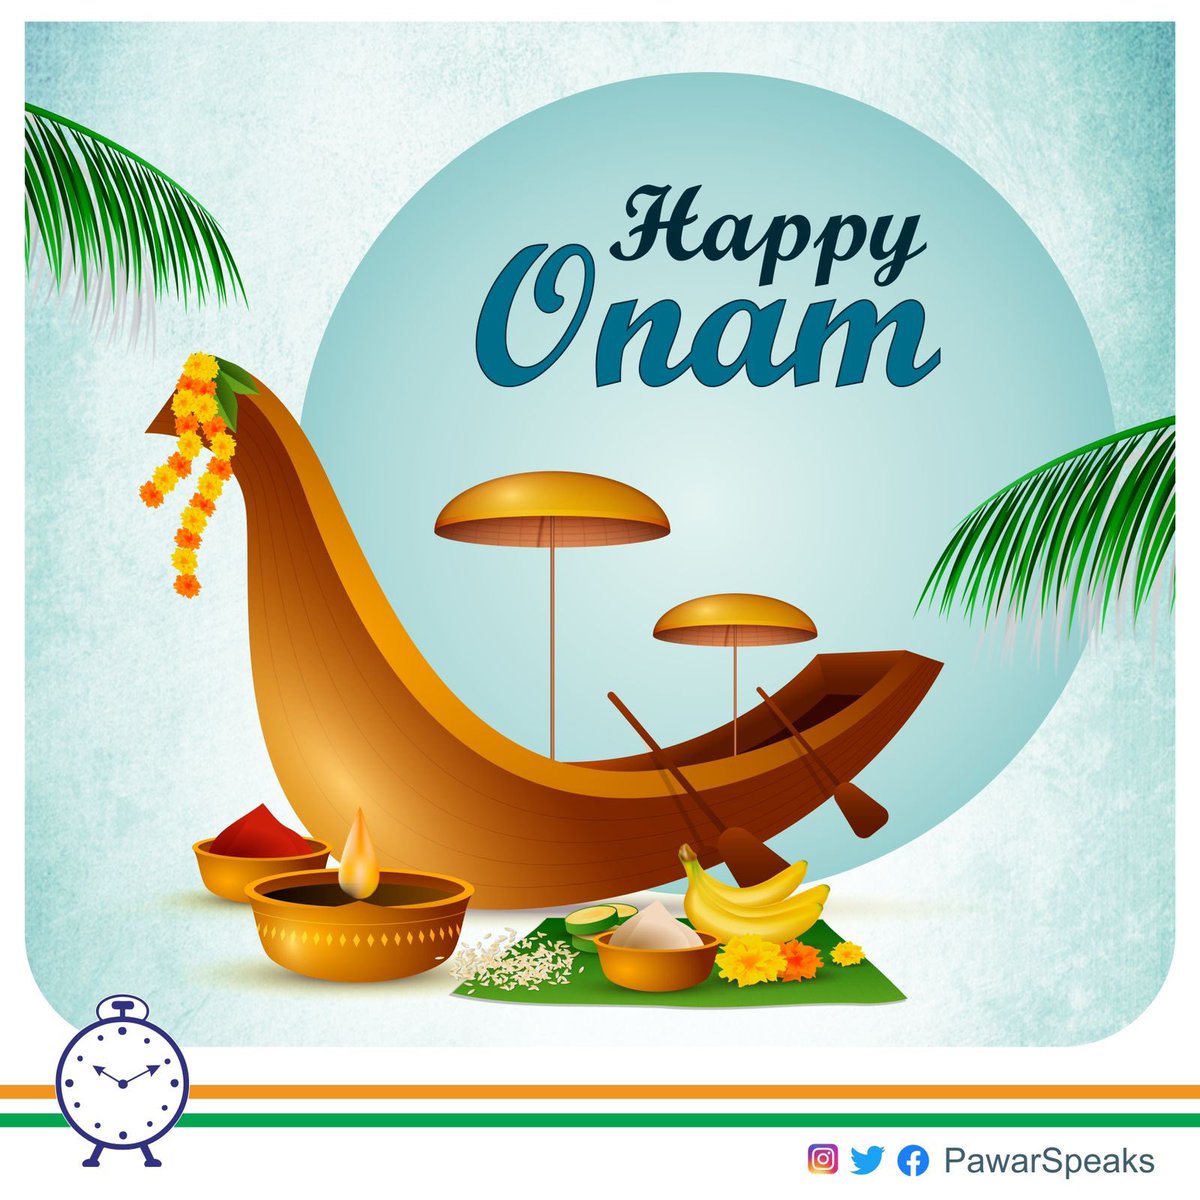 Happy Onam! Let the spirit of Onam illuminate our hearts and homes. Wishing everyone happiness, prosperity, and a heart full of gratitude.